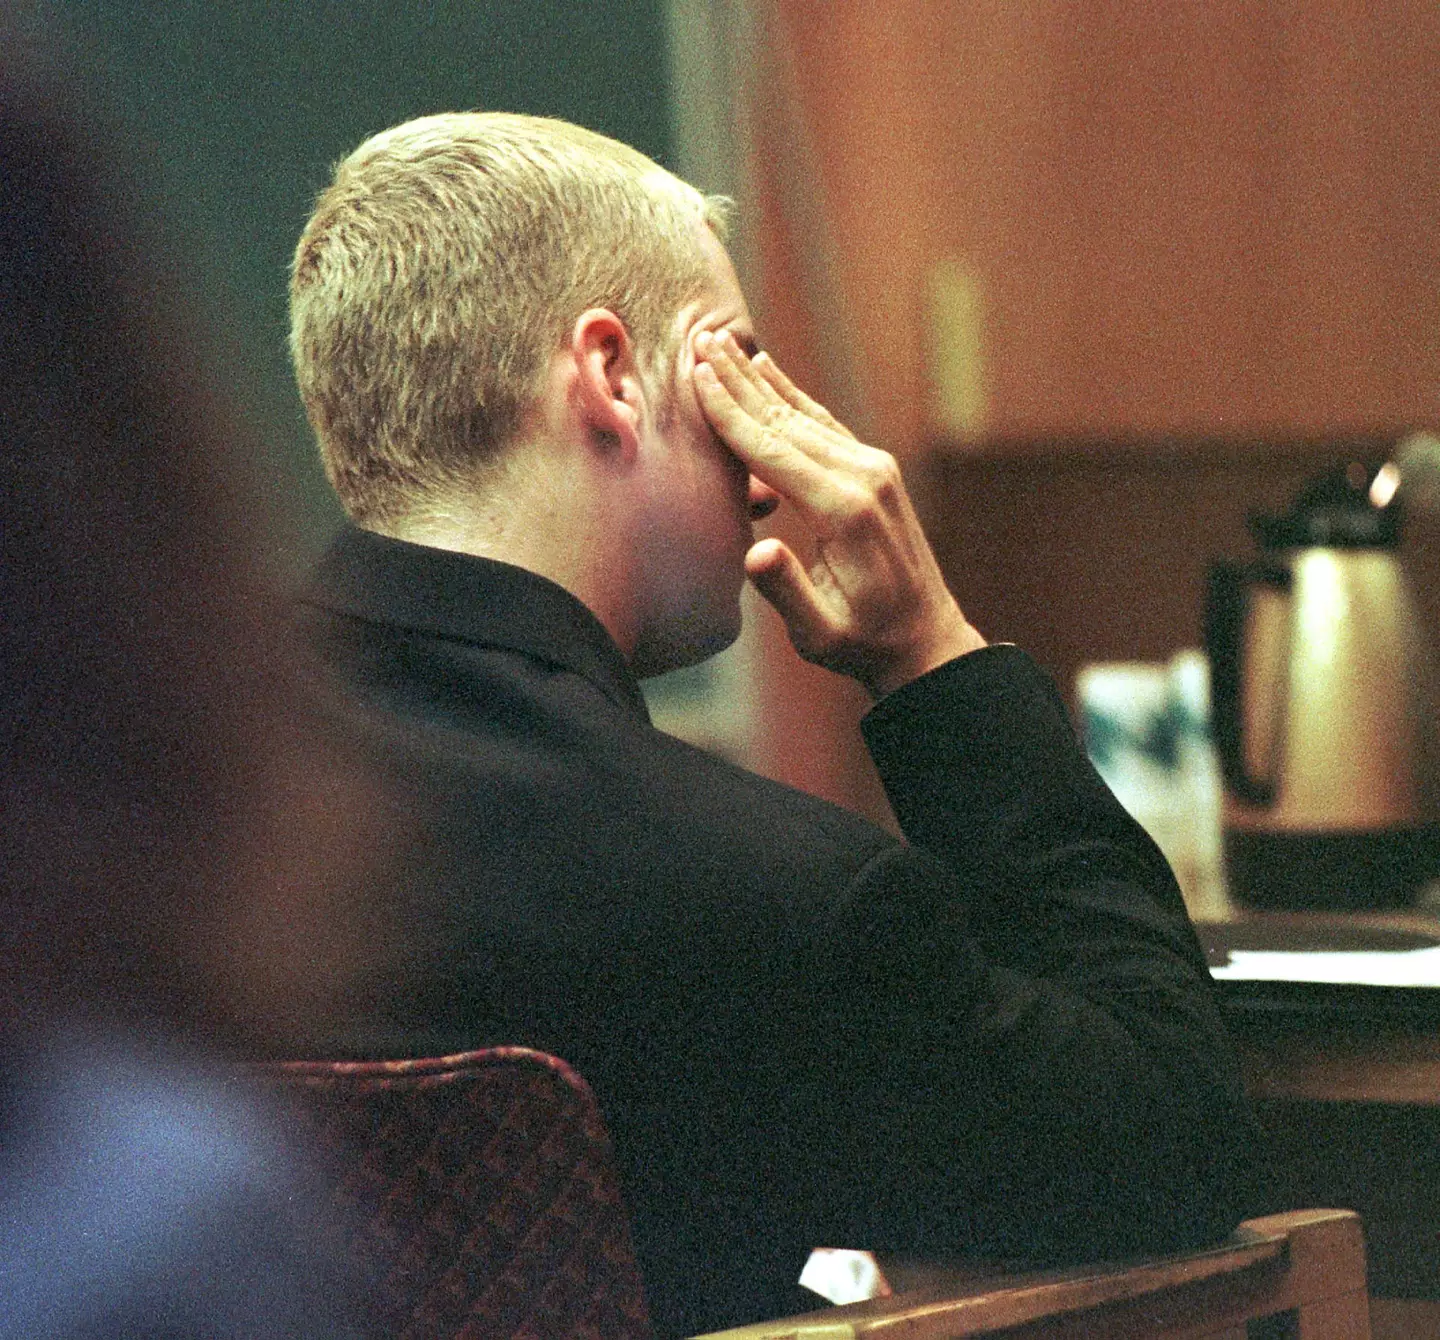 The judge referenced an Eminem song in court.